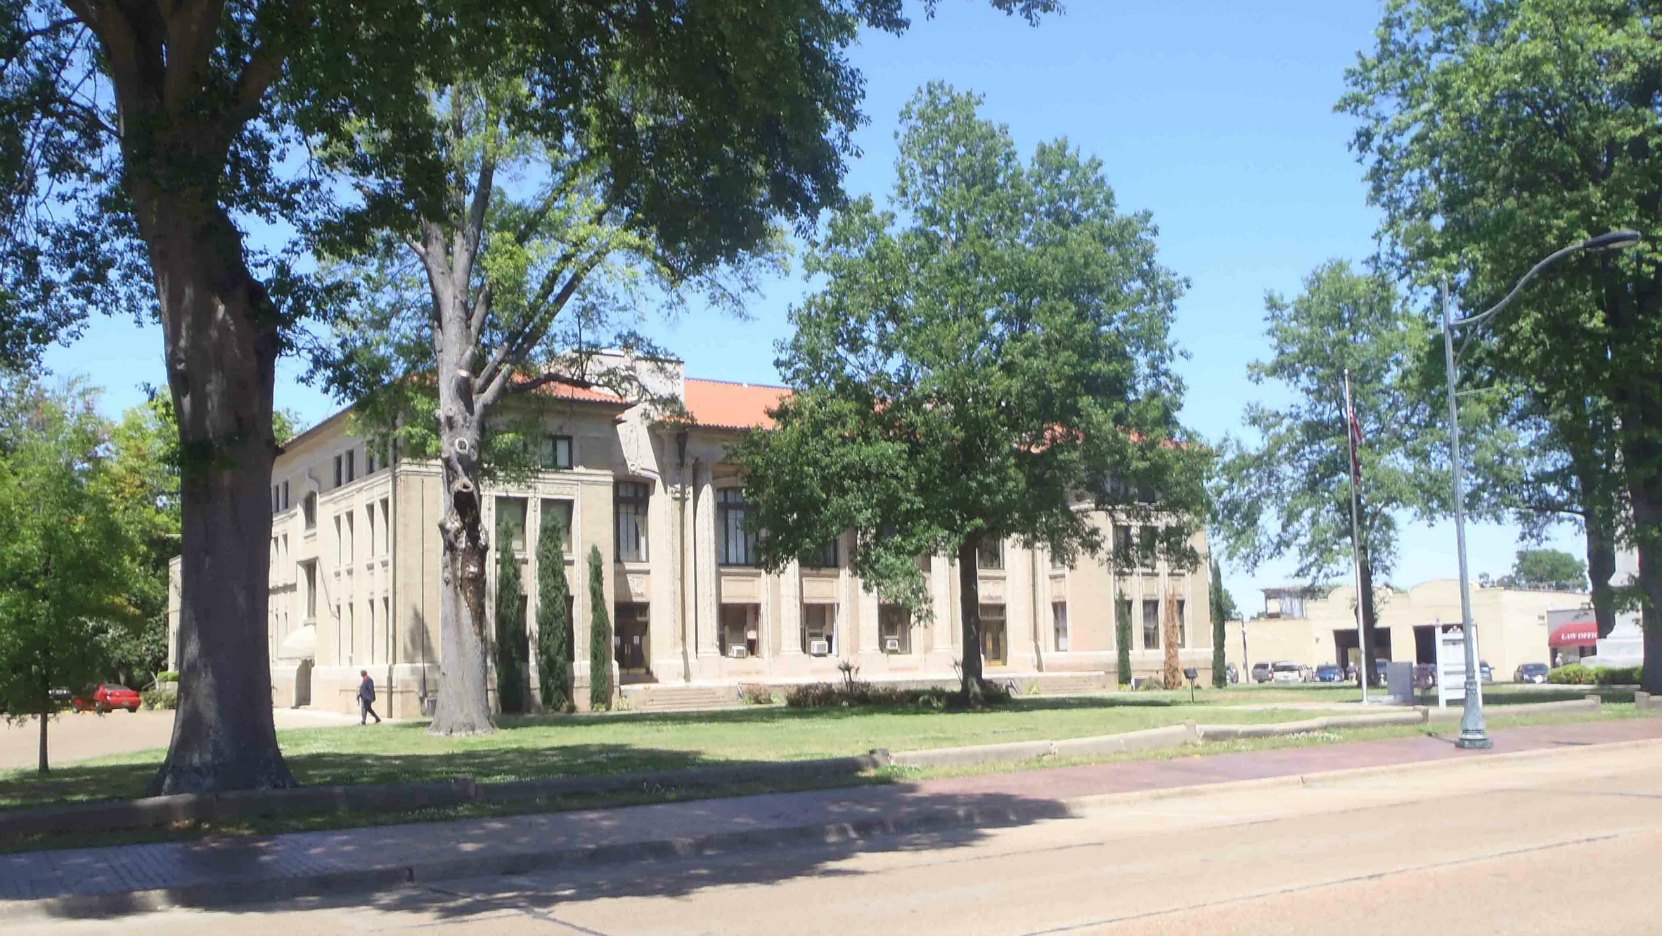 The Bolivar County Courthouse now stands on the site of W.C. Handy's Enlightenment About The Blues